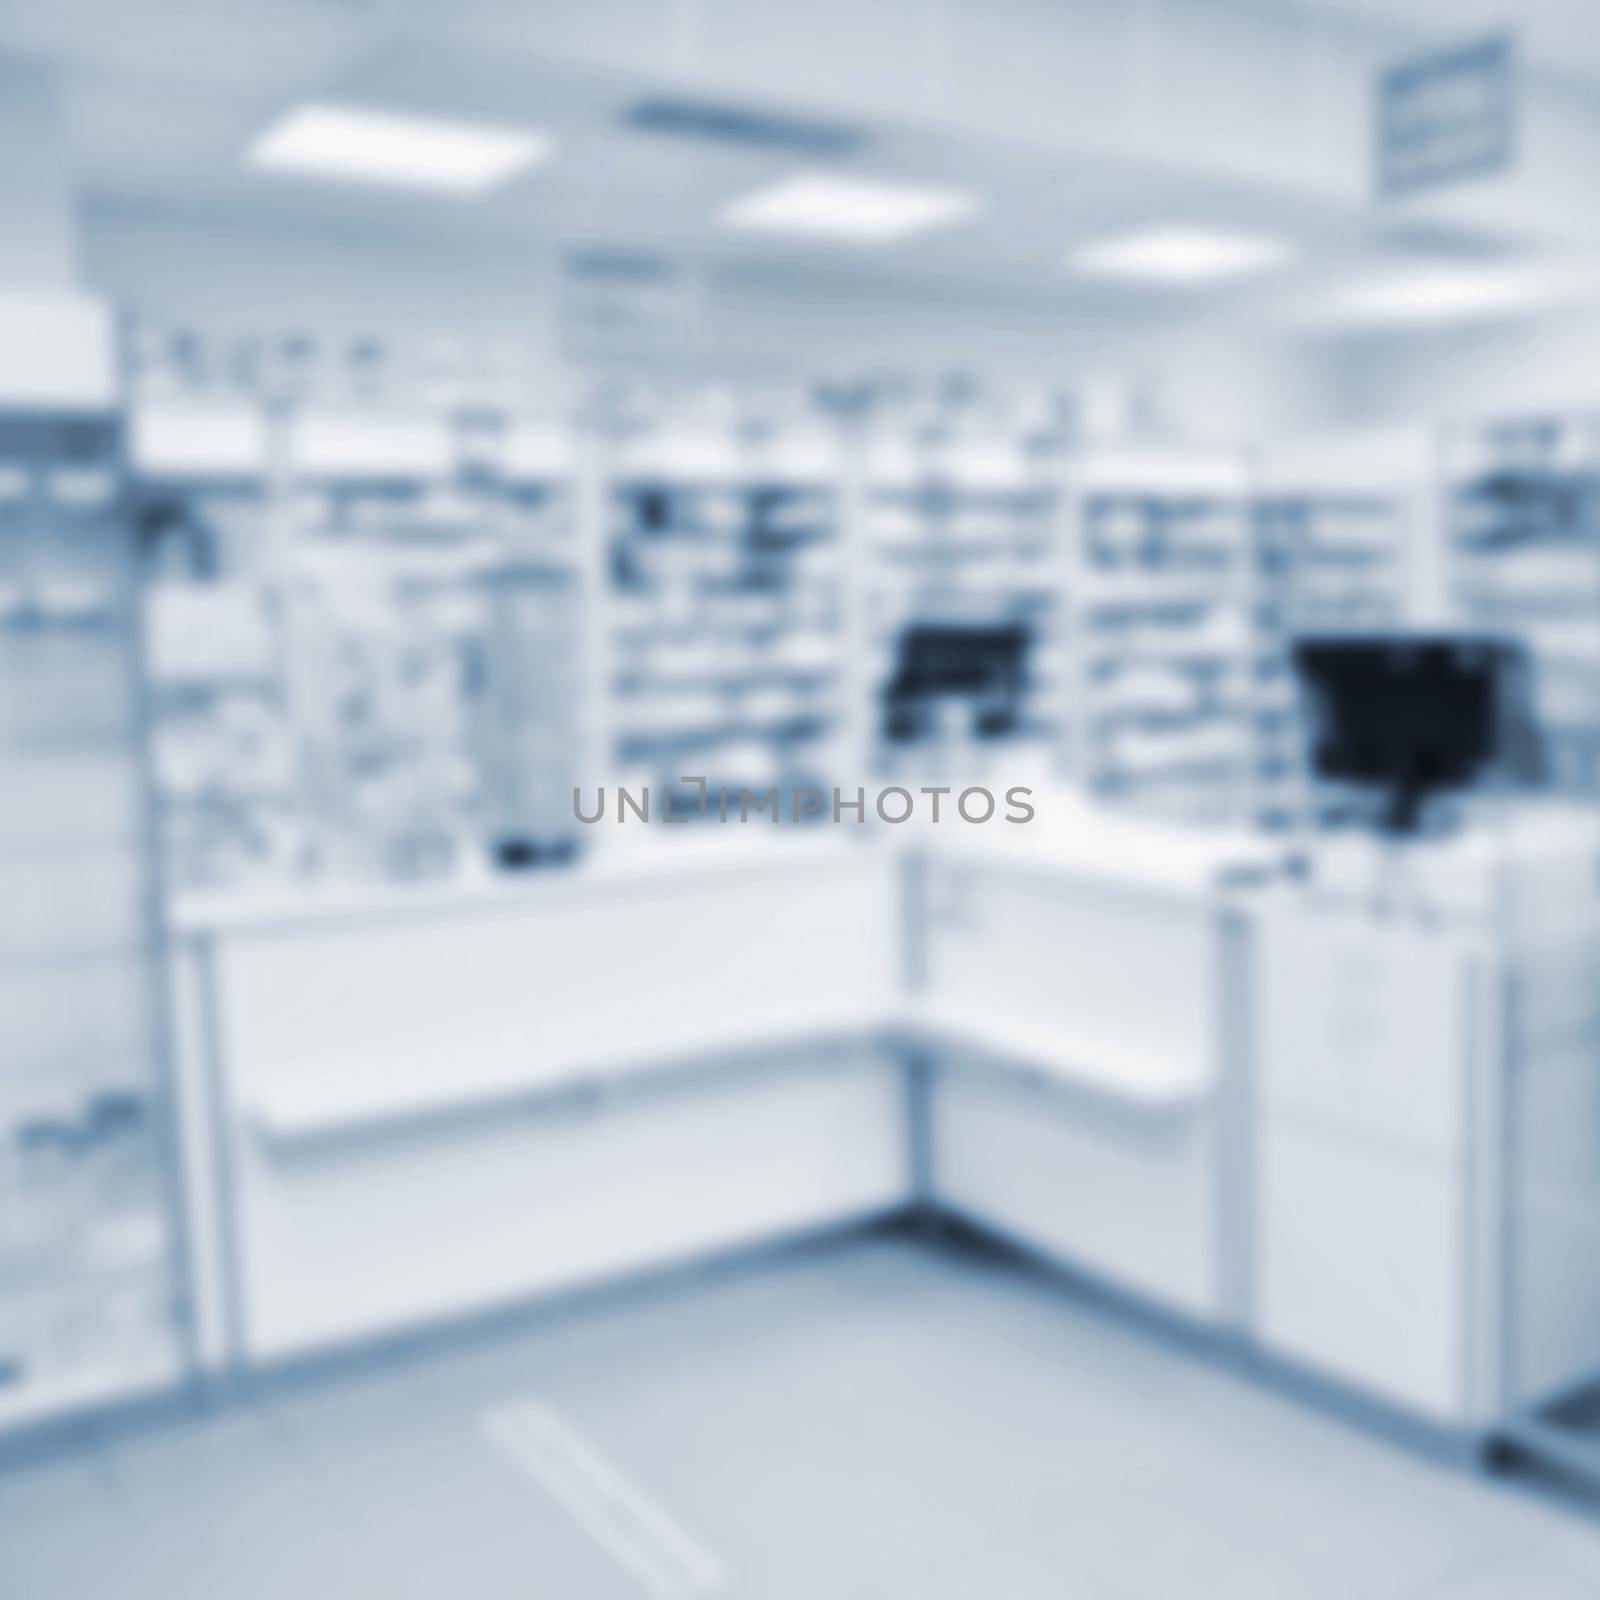 Blurred background. Interior of a pharmacy with goods and showcases. Medicines and vitamins for health. Shop concept, medicine and healthy lifestyle. by Montypeter